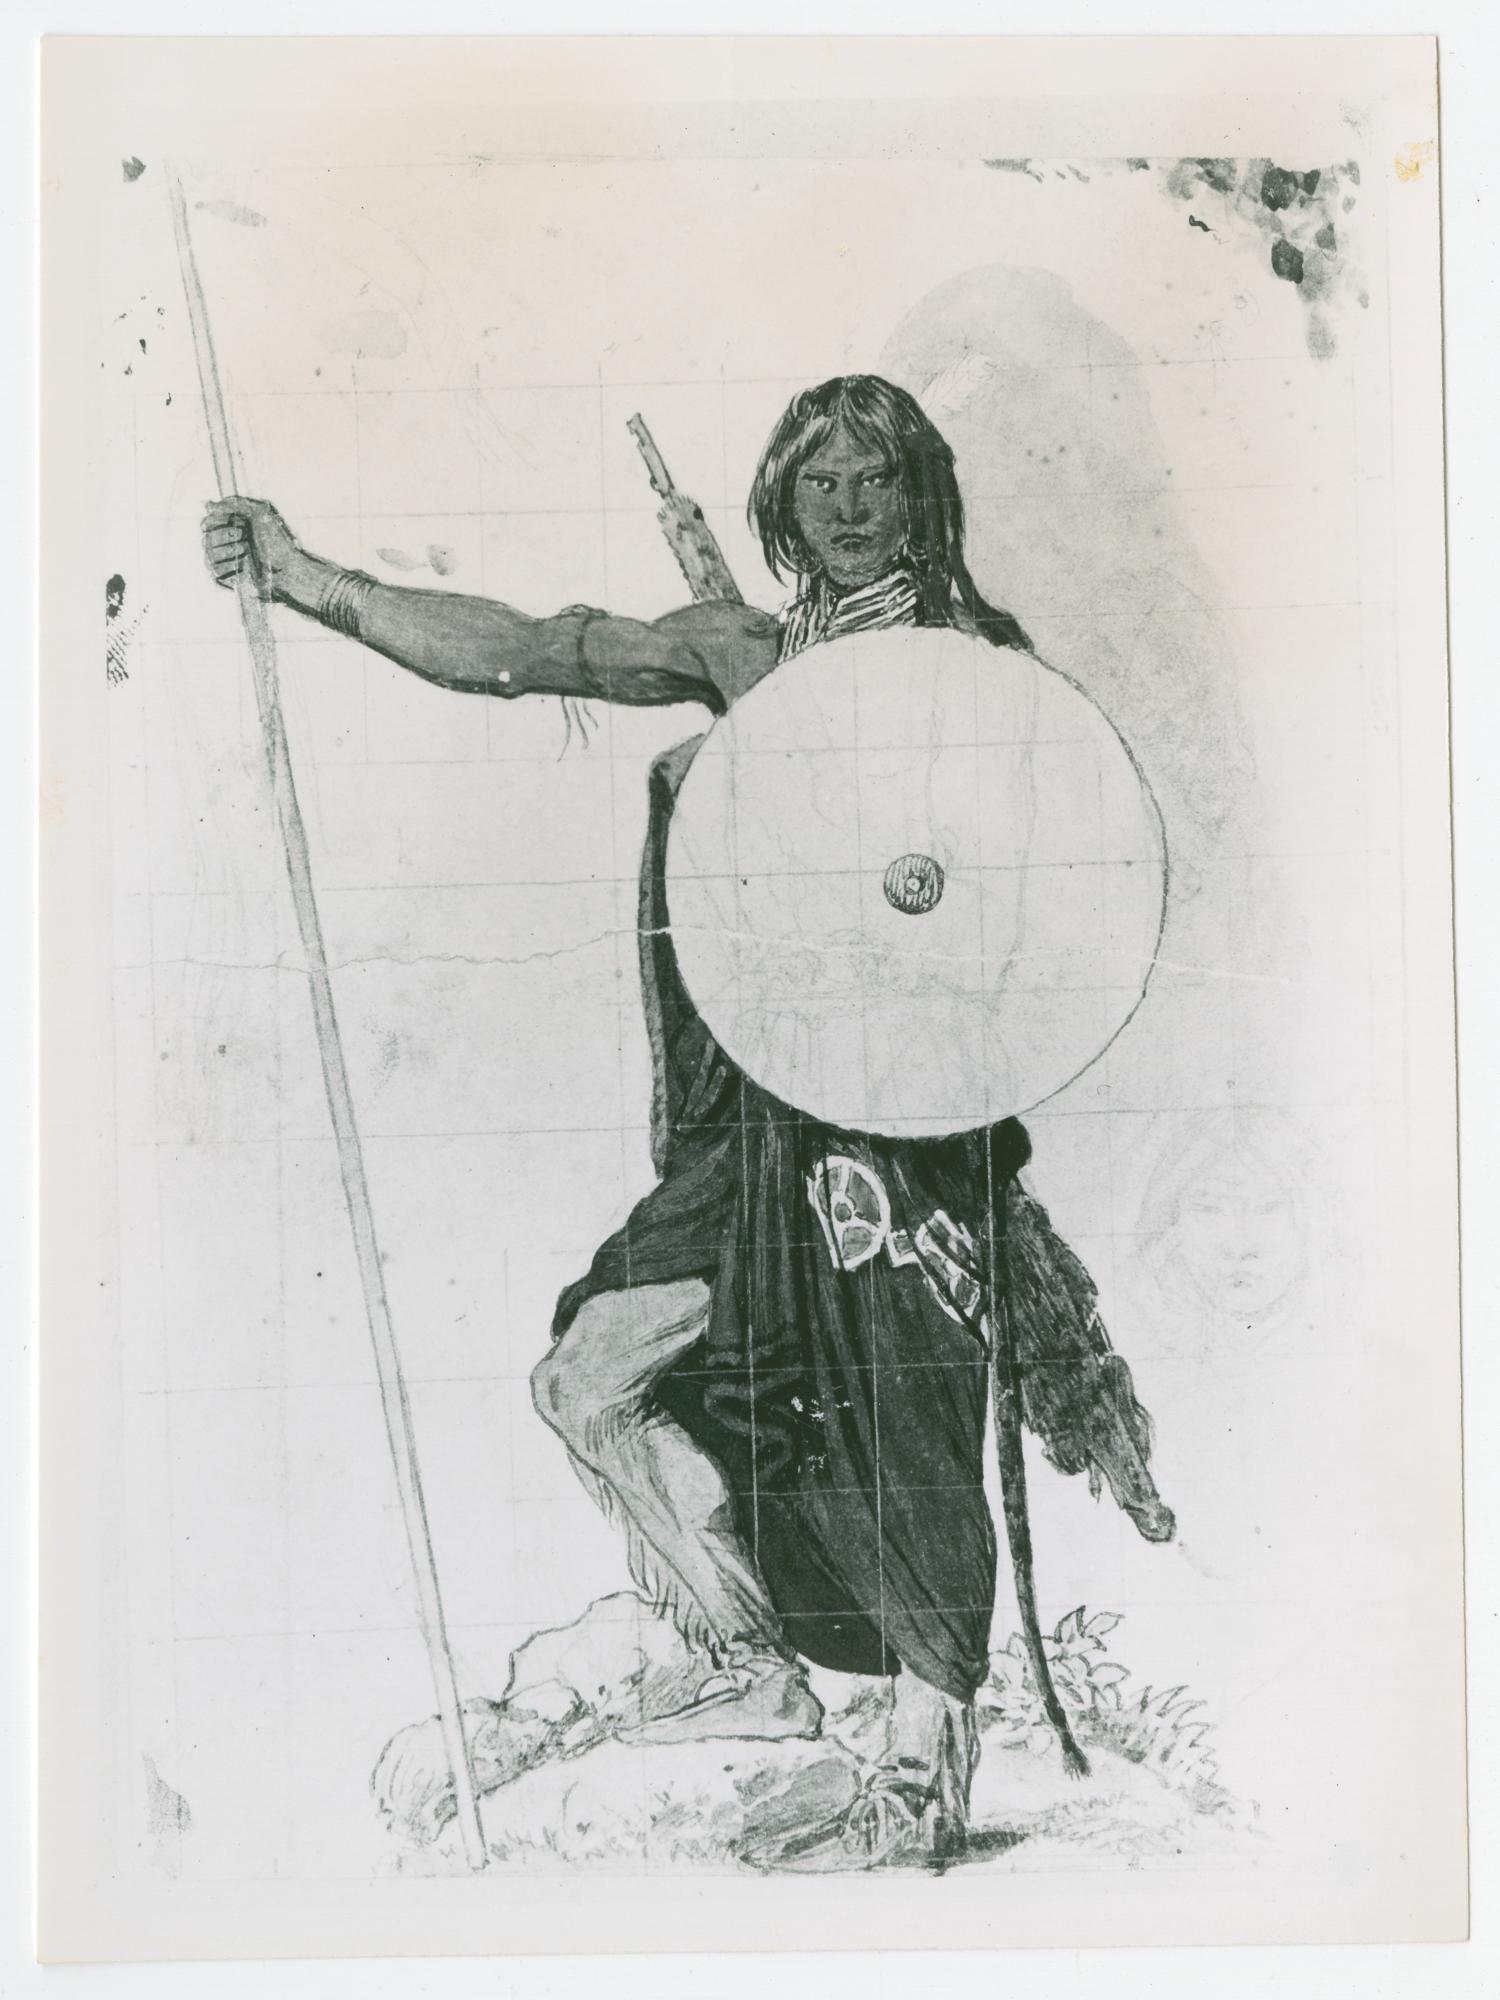 native american spear drawing